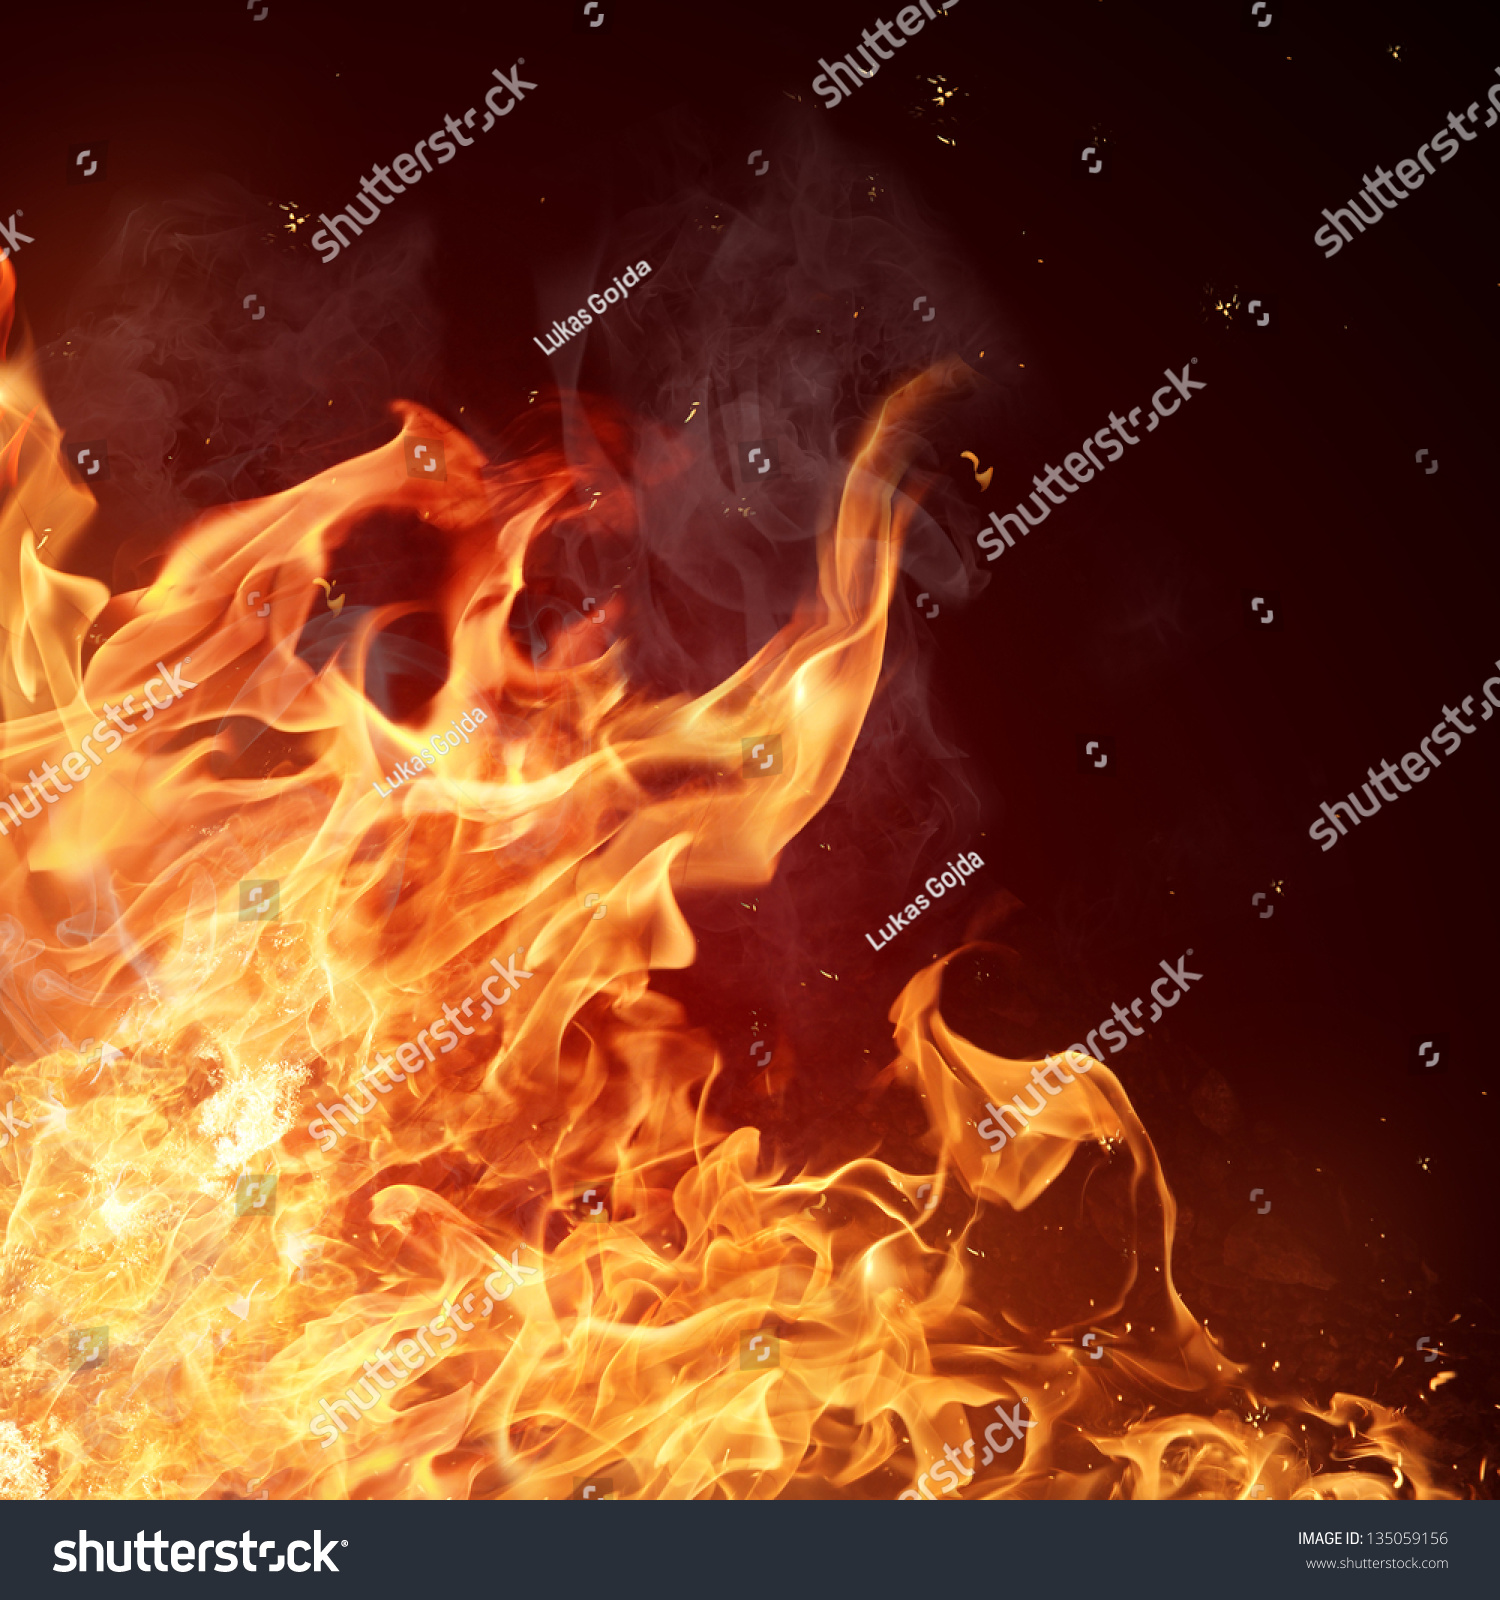 Fire flames background #135059156